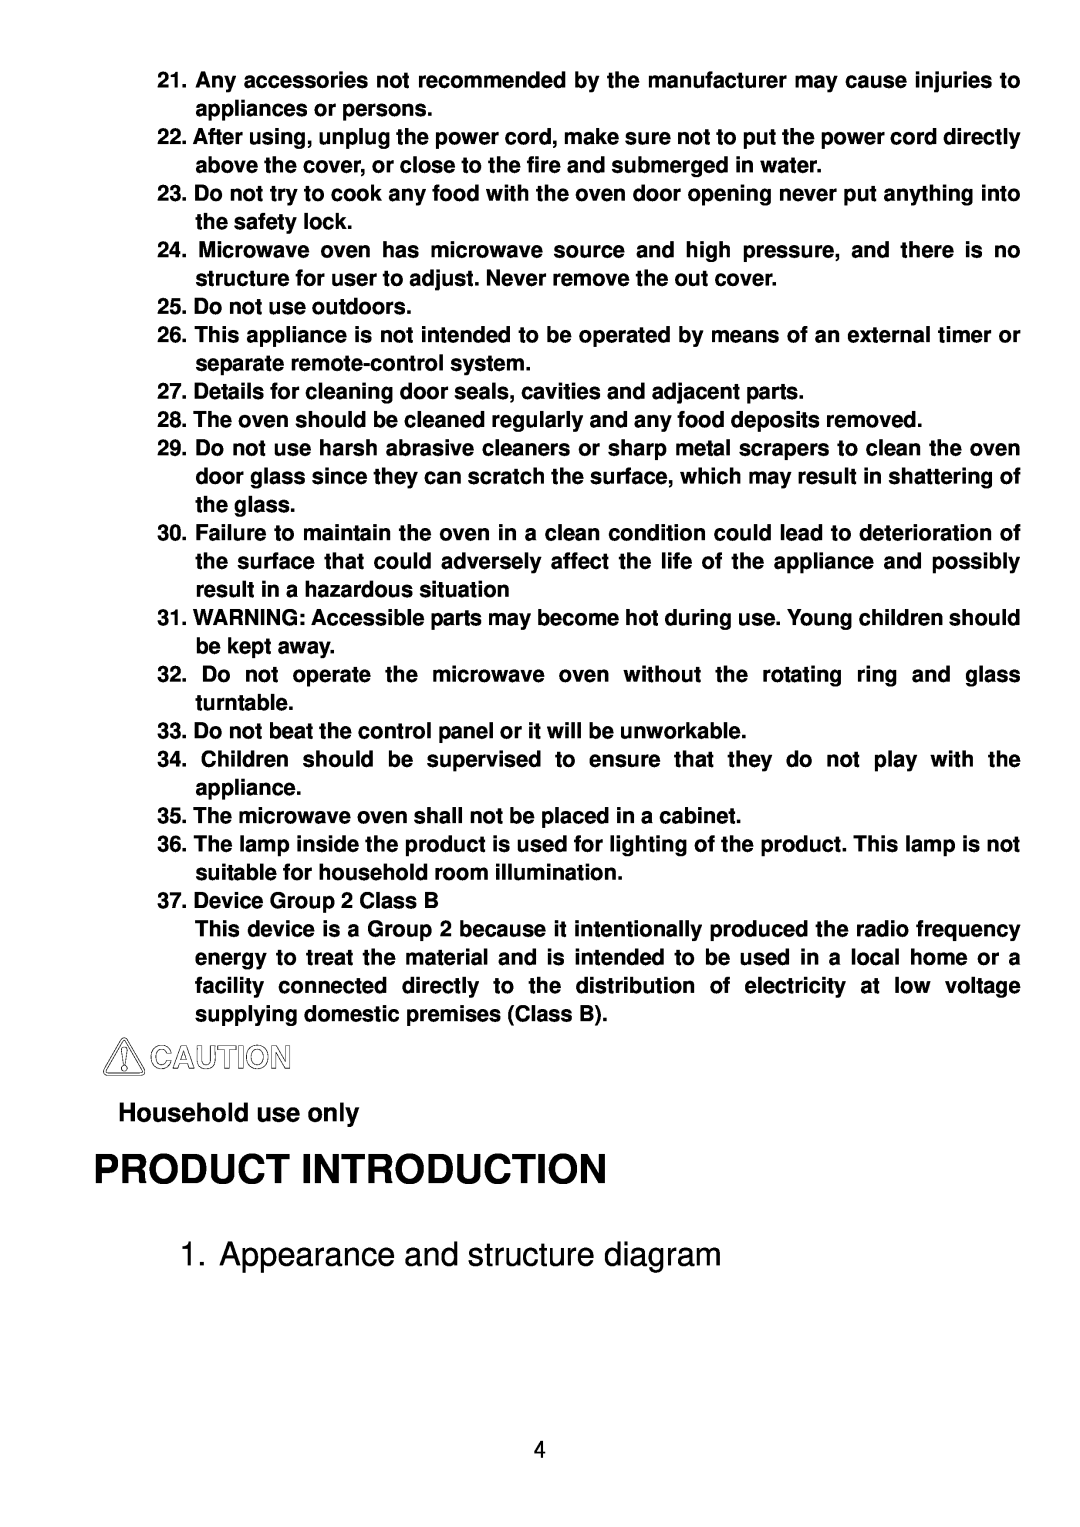 Haier 23PG27 manual Product Introduction, Appearance and structure diagram, Household use only 